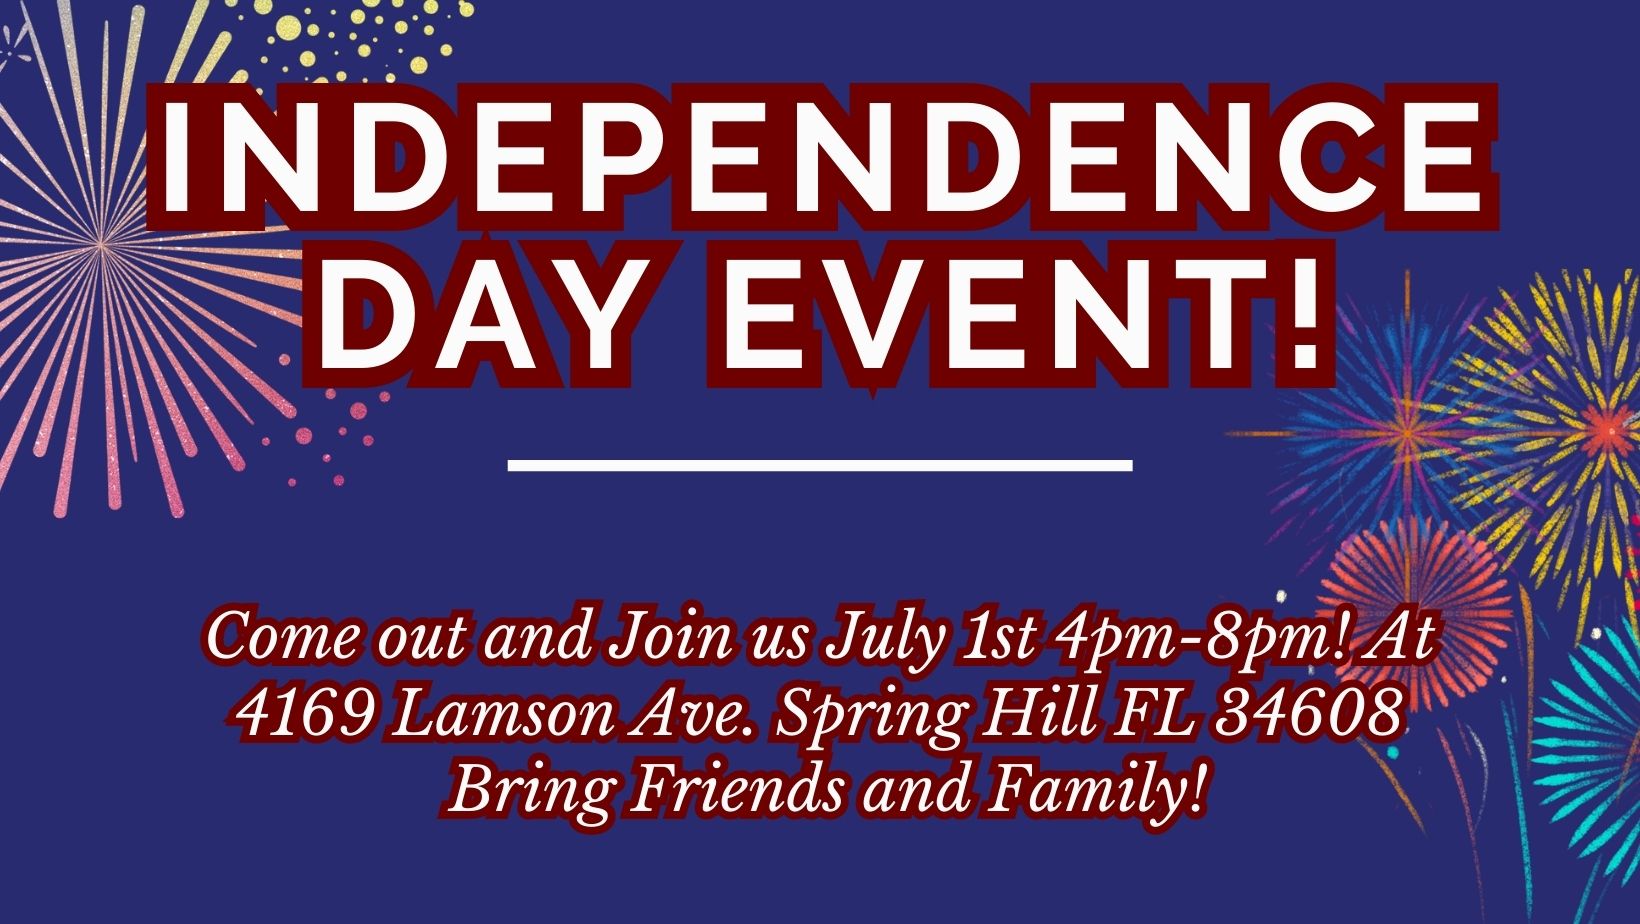 Independance Day Event! cover image